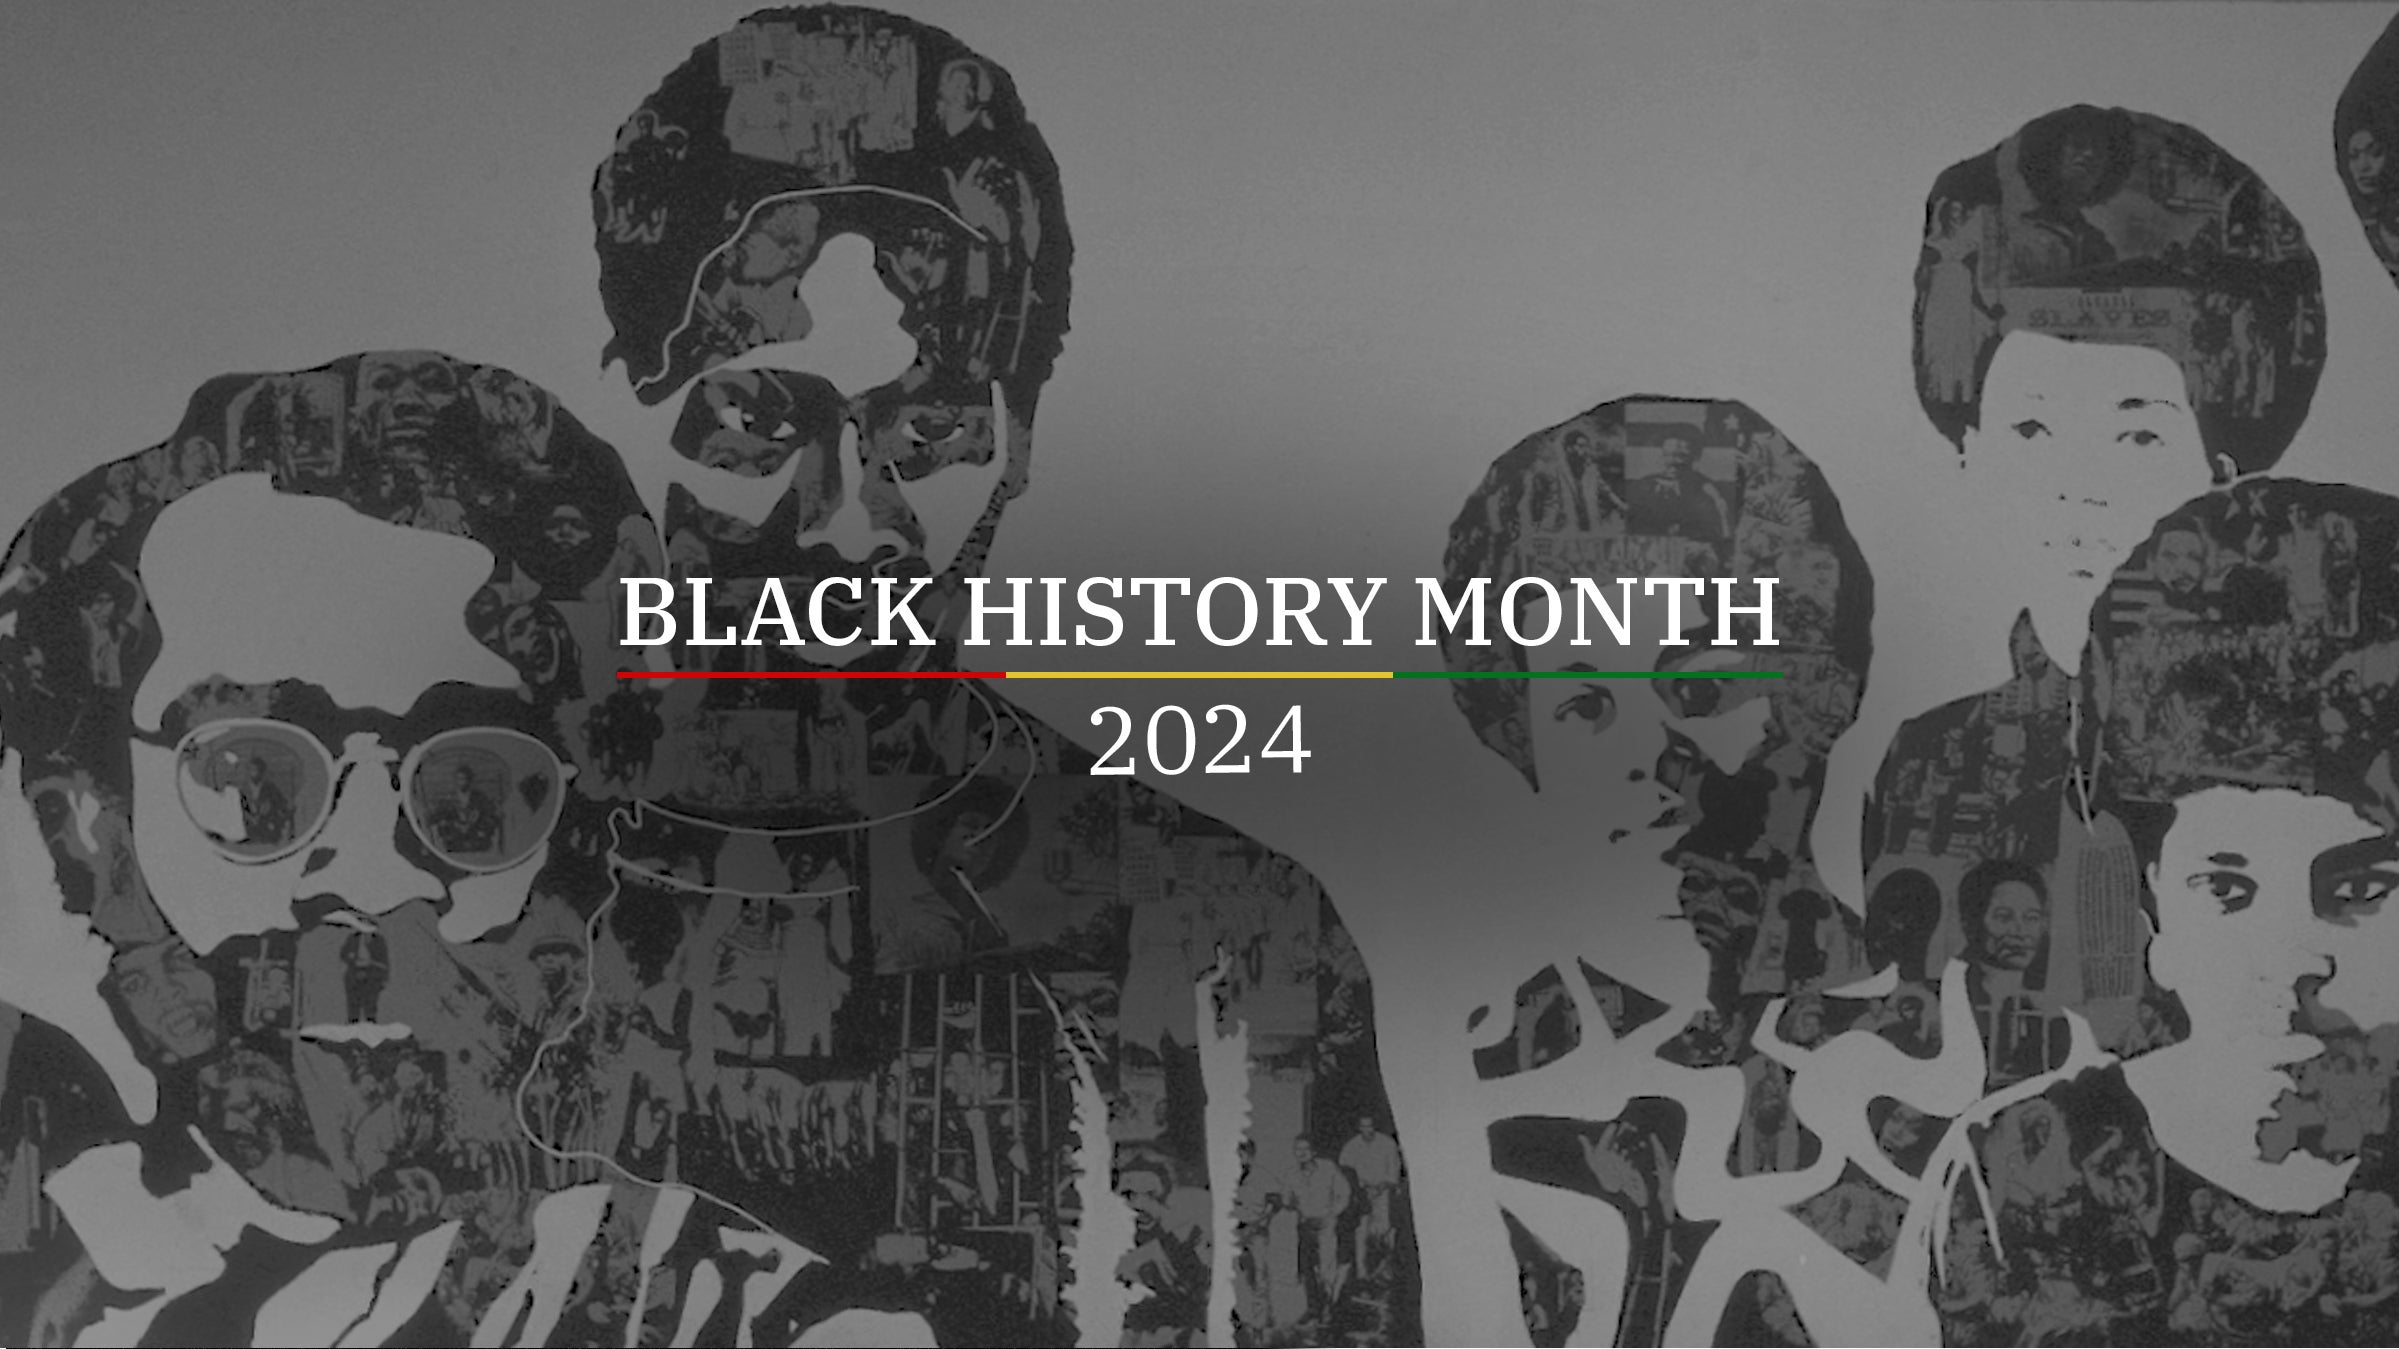 black history month 2024 - mural painting in the background